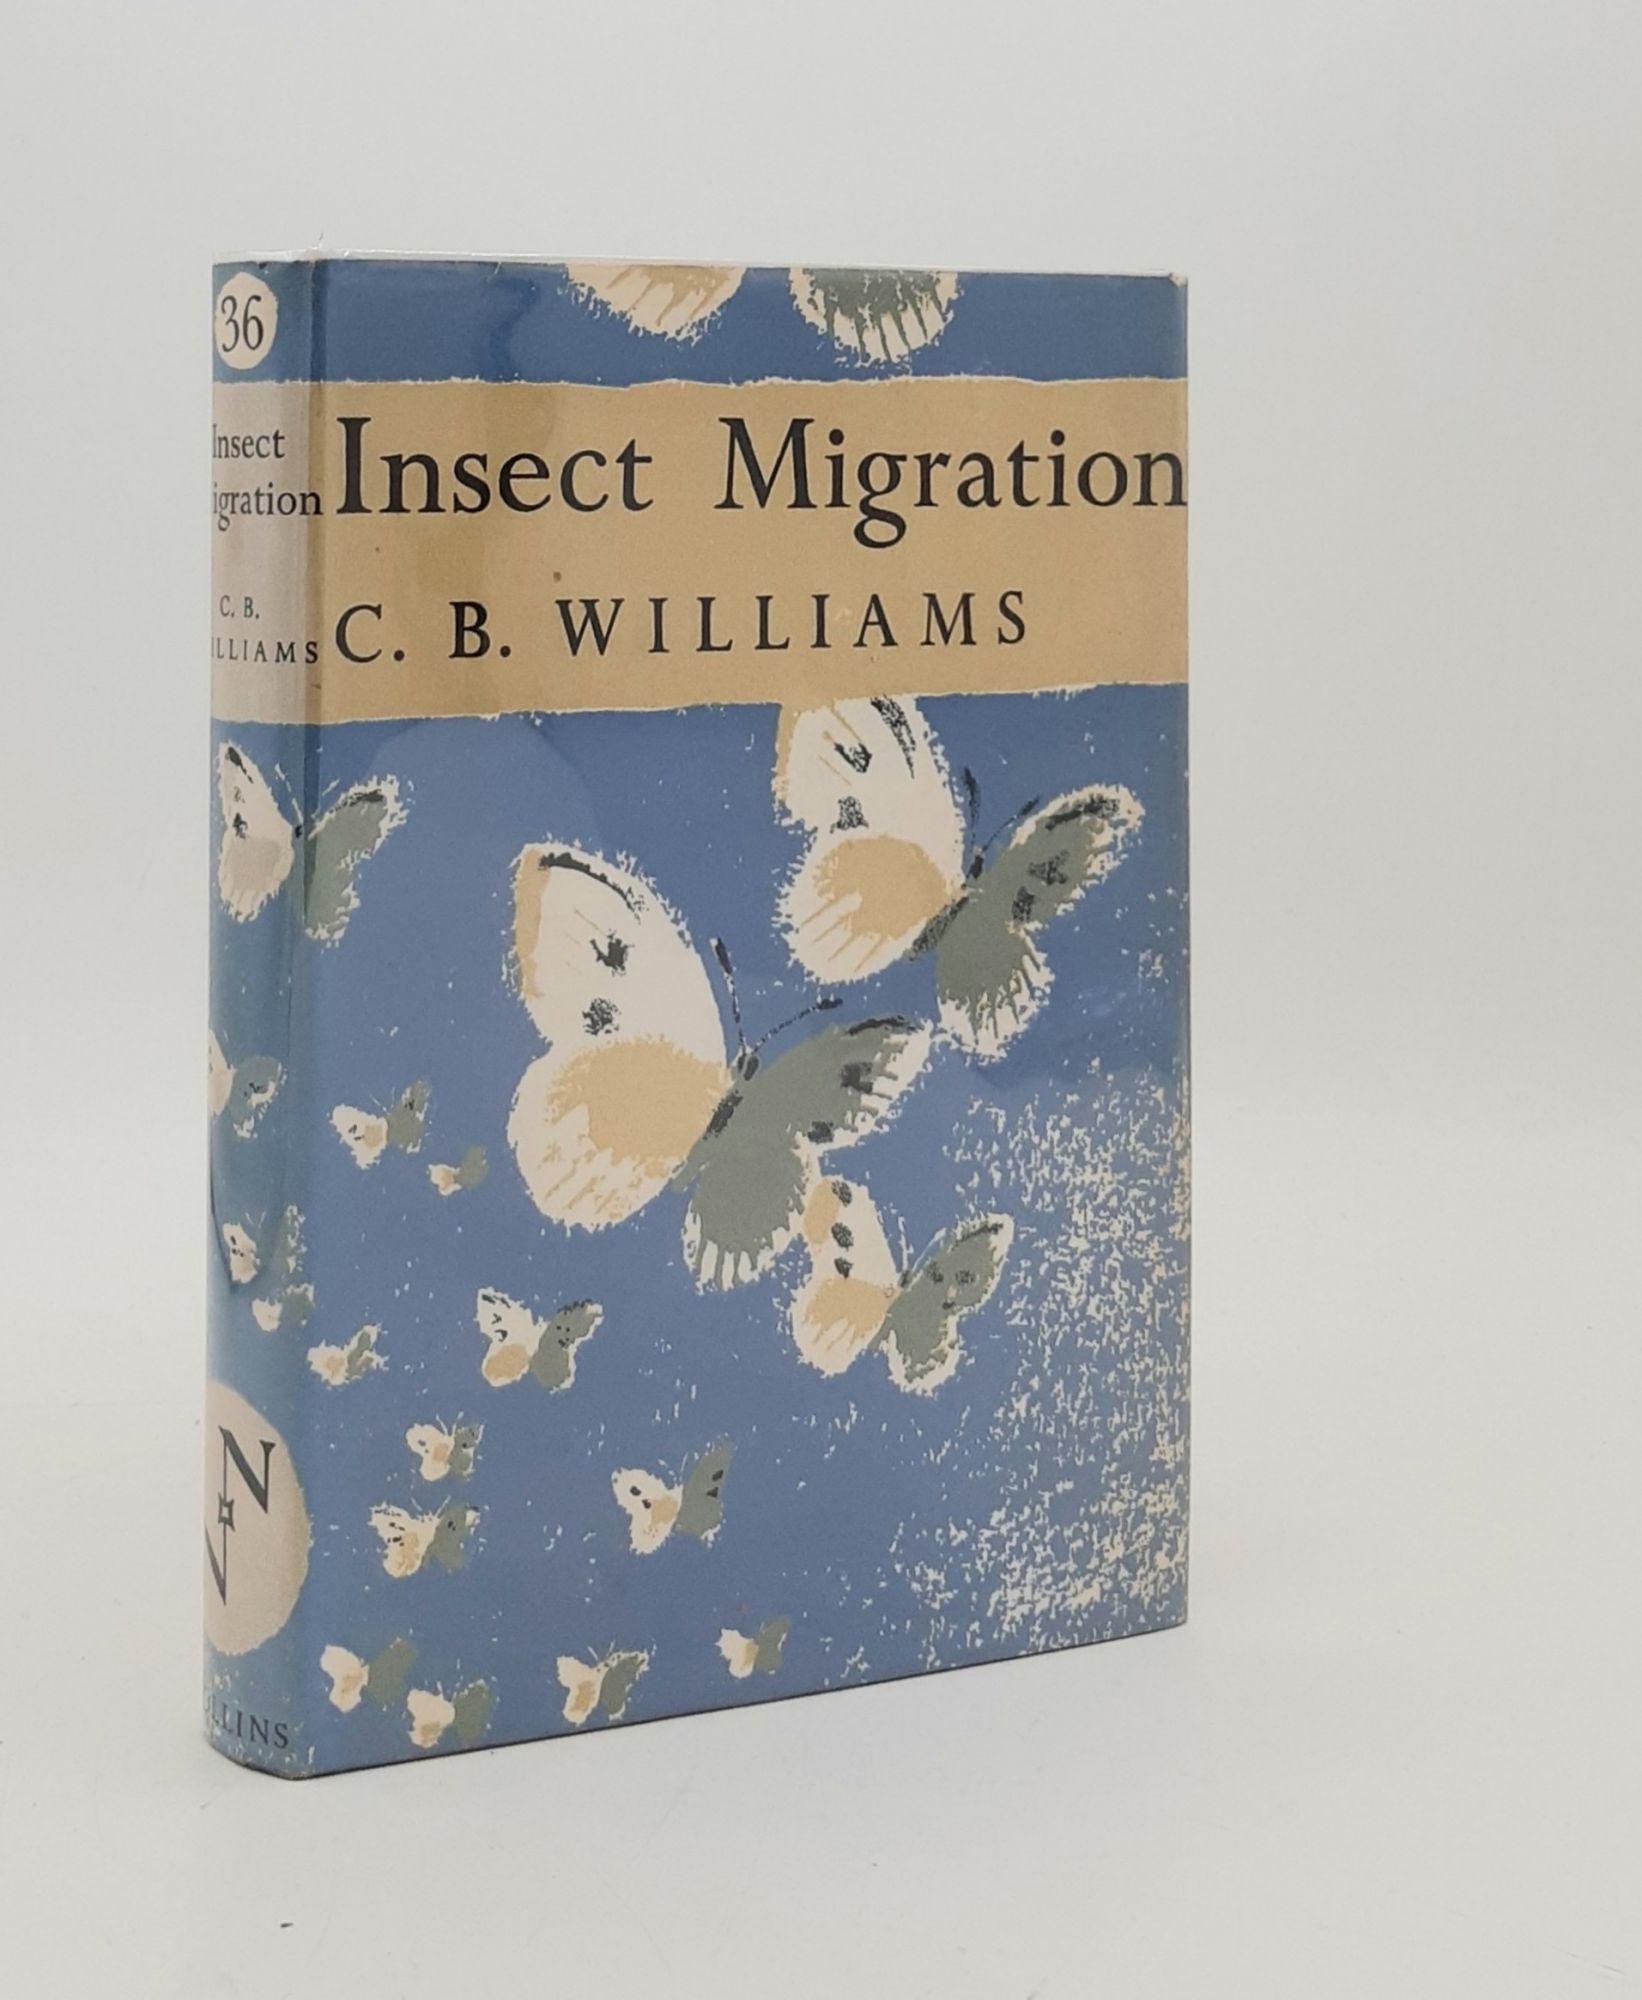 WILLIAMS C.B. - Insect Migration New Naturalist No. 36